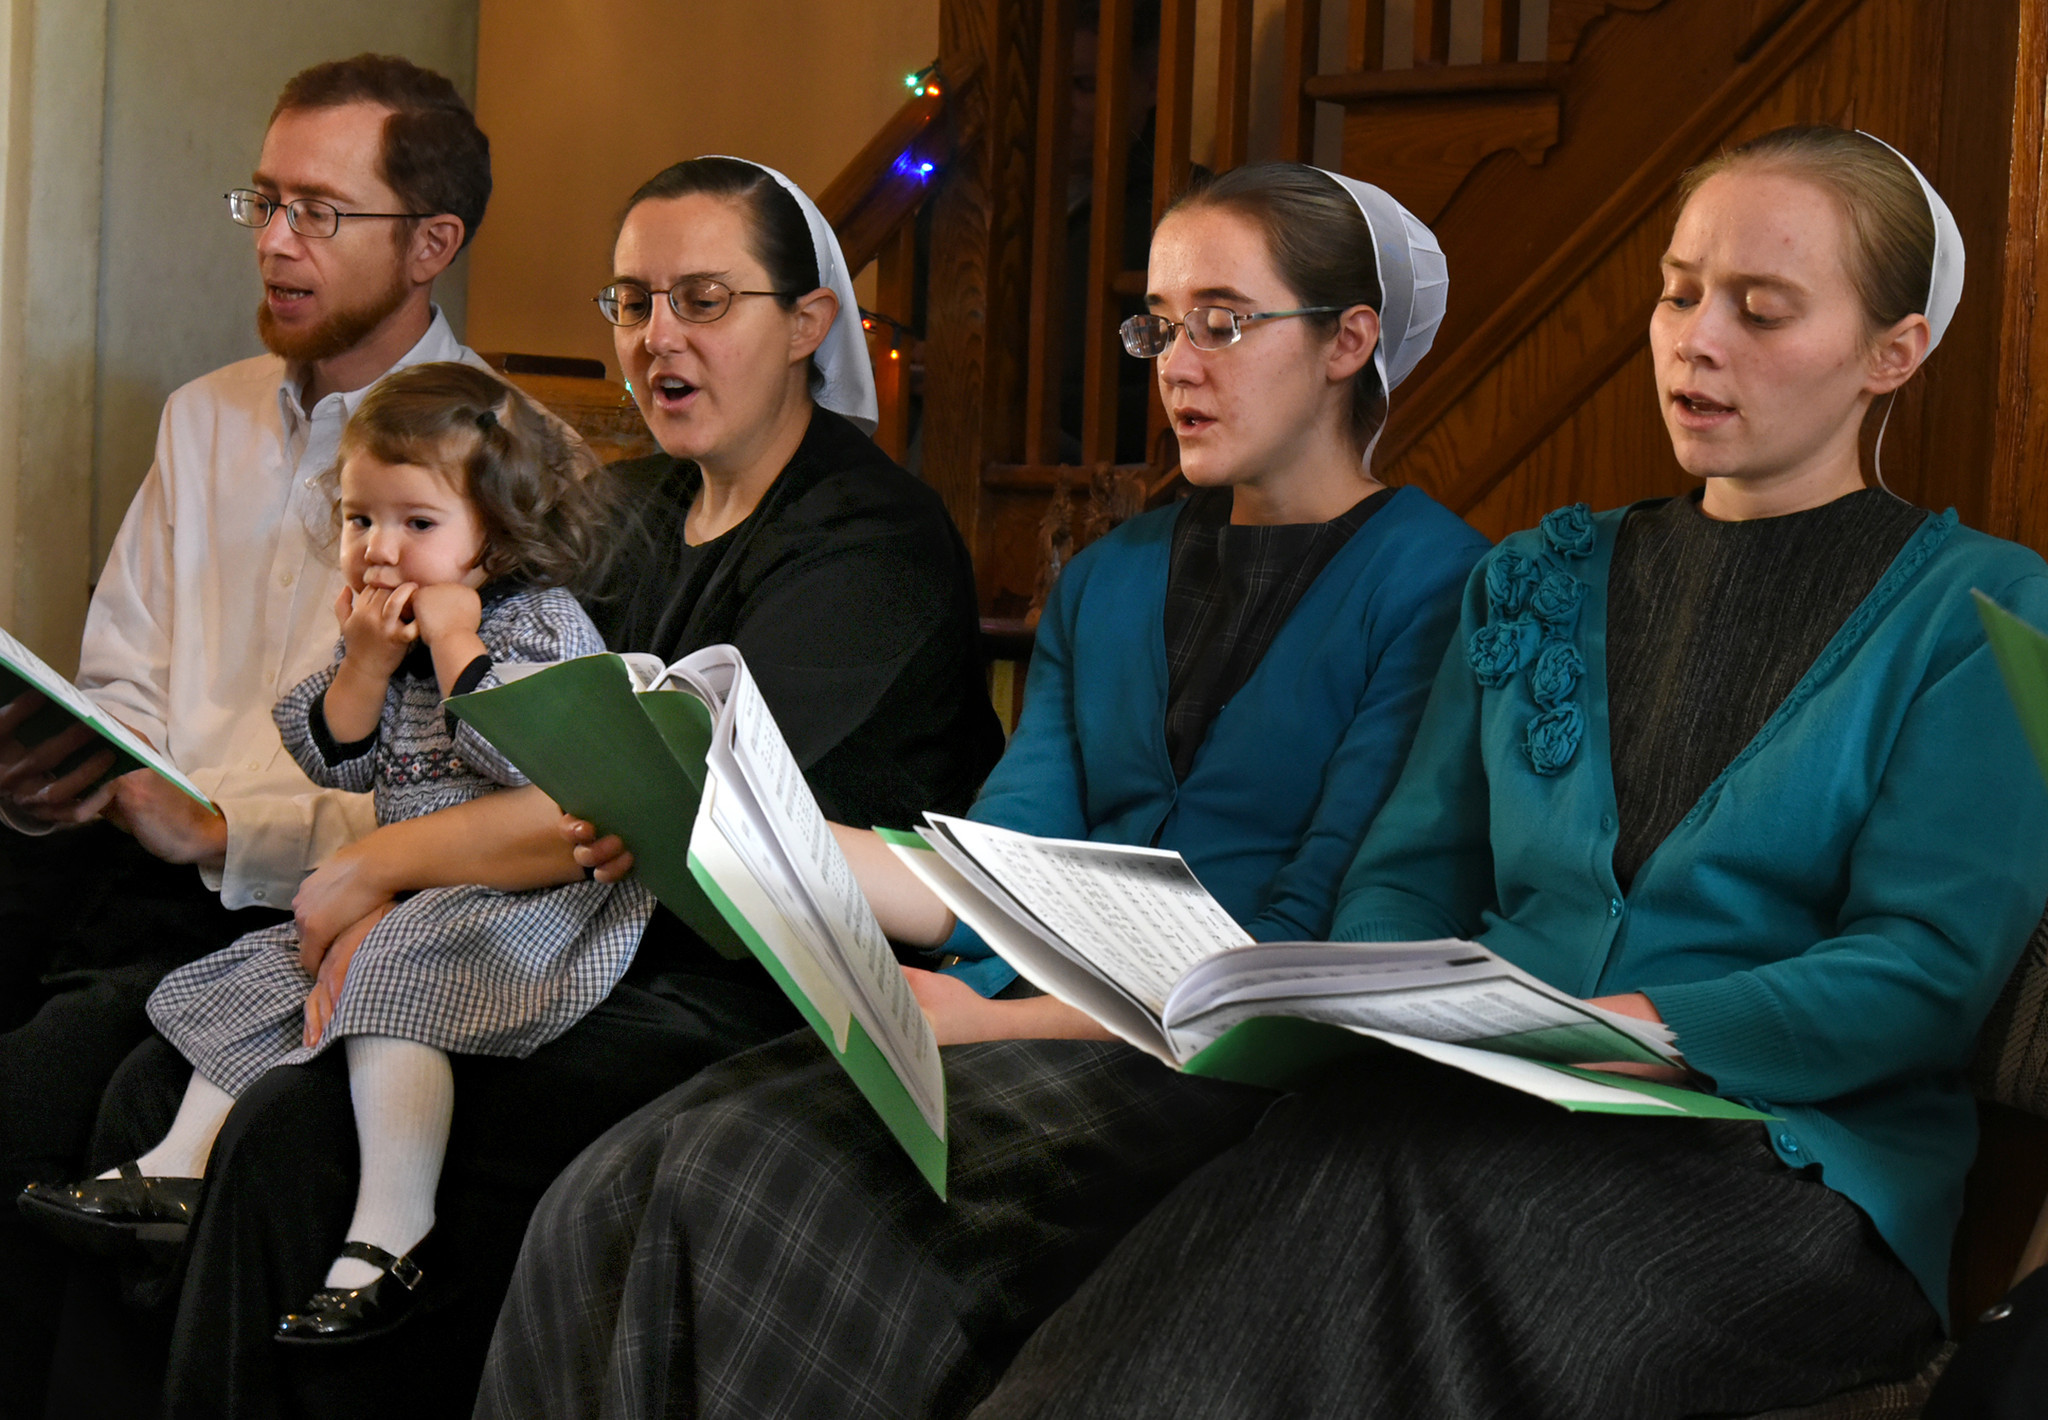 Who are the Mennonites?